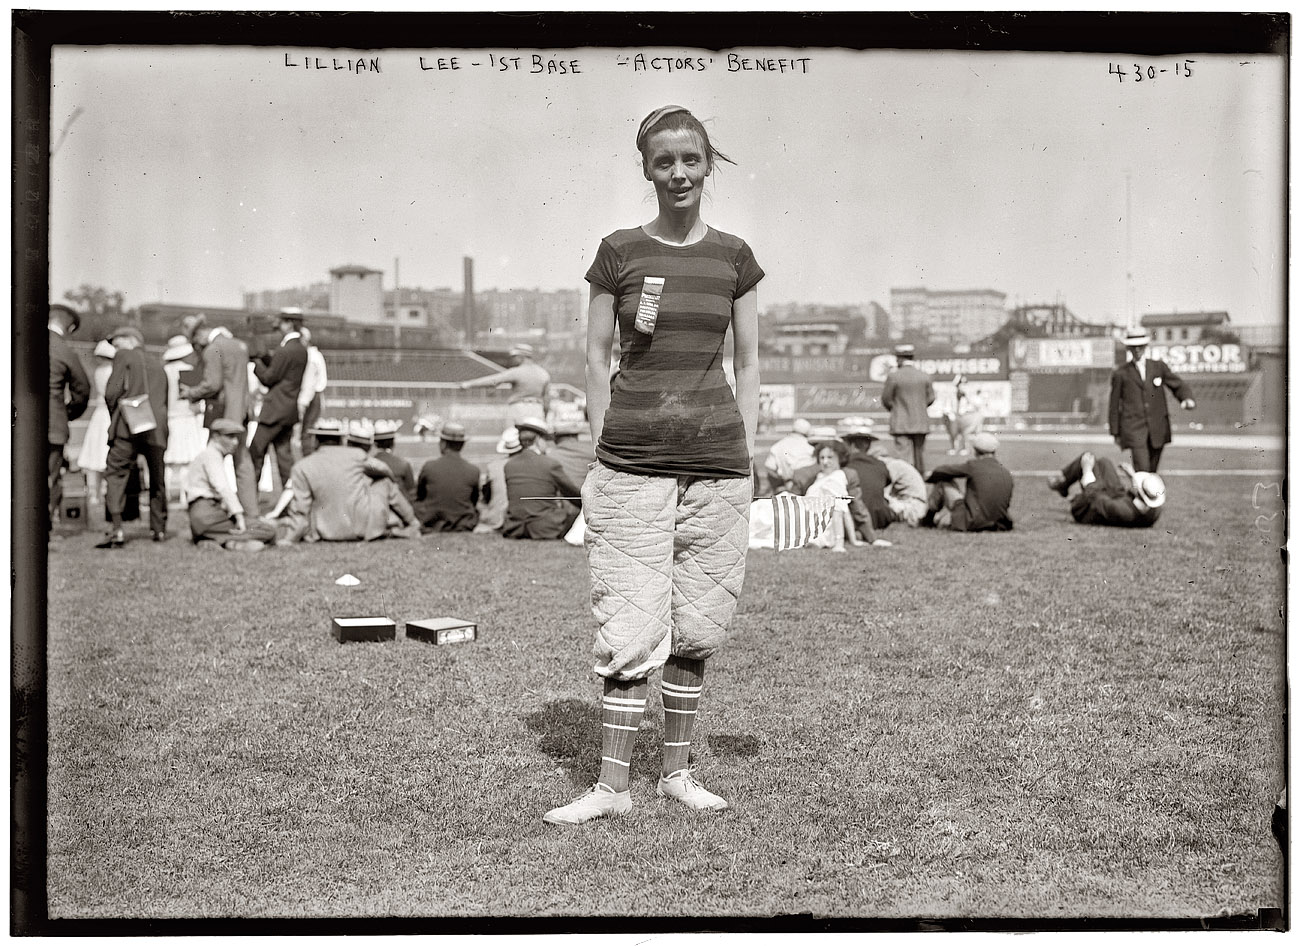 July 17, 1908. Actors field day benefit for the New York Home for Destitute Crippled Children. Lillian Lee at the Polo Grounds "as first base." View full size. 5x7 glass negative, George Grantham Bain Collection.